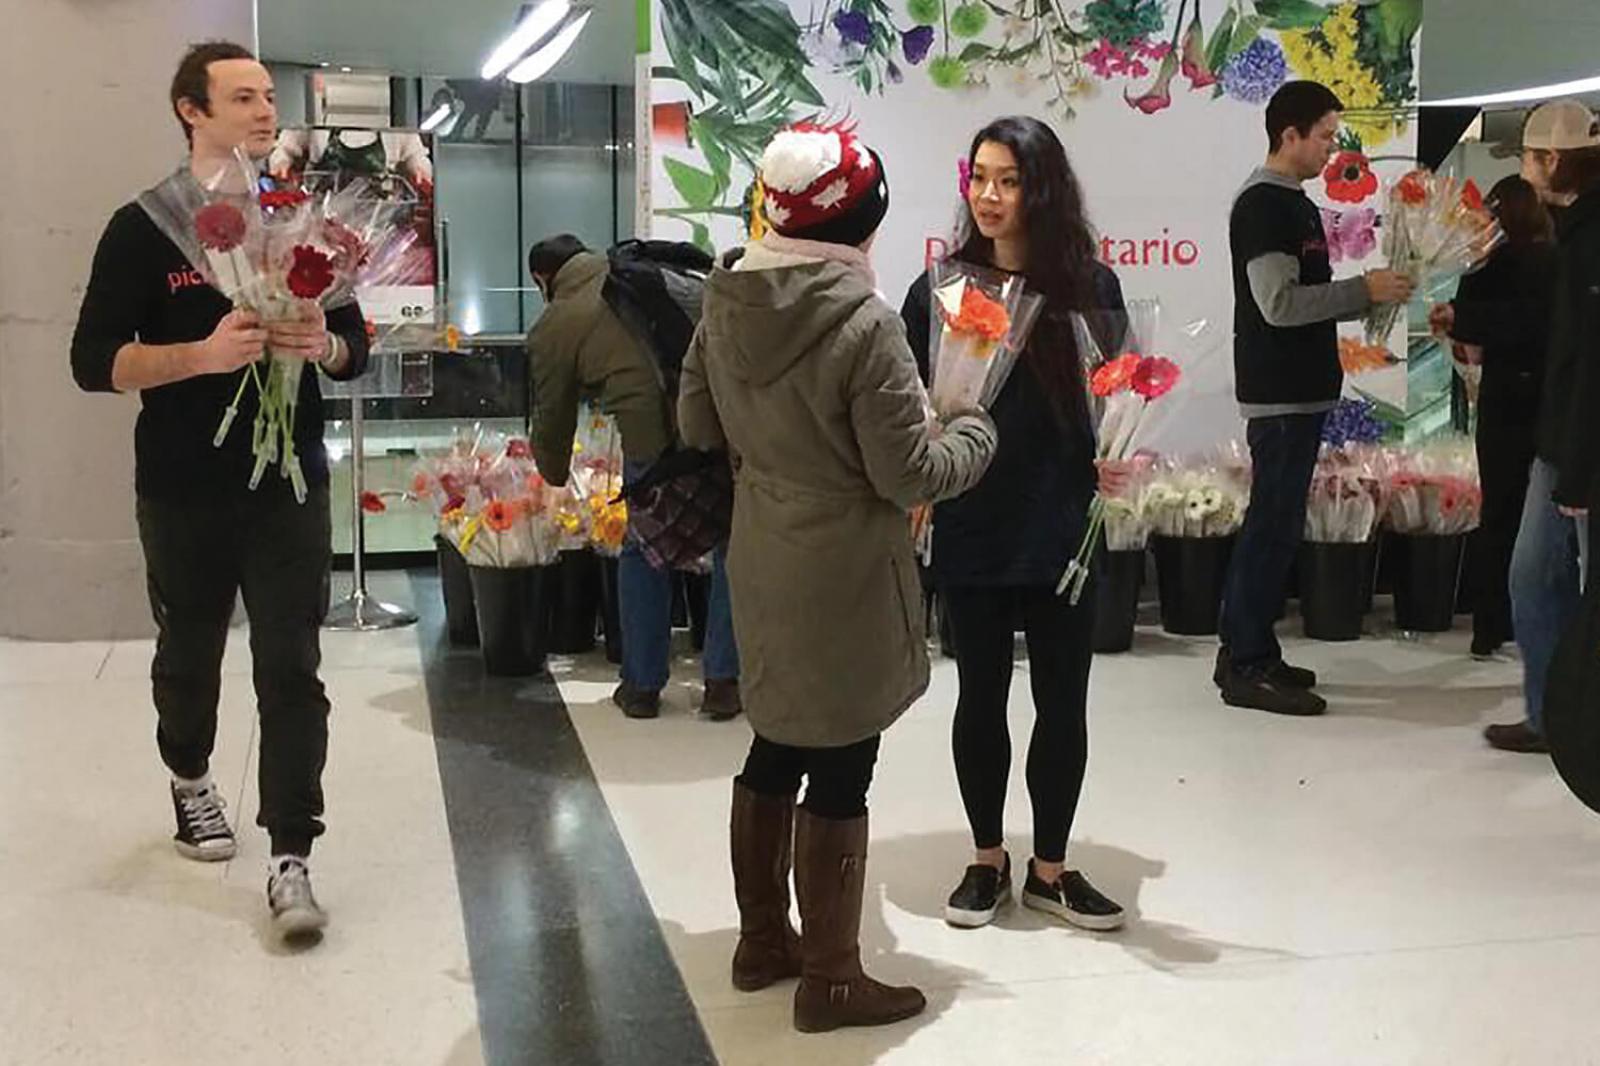 Flowers bring happiness and smiles to Union Station commuters